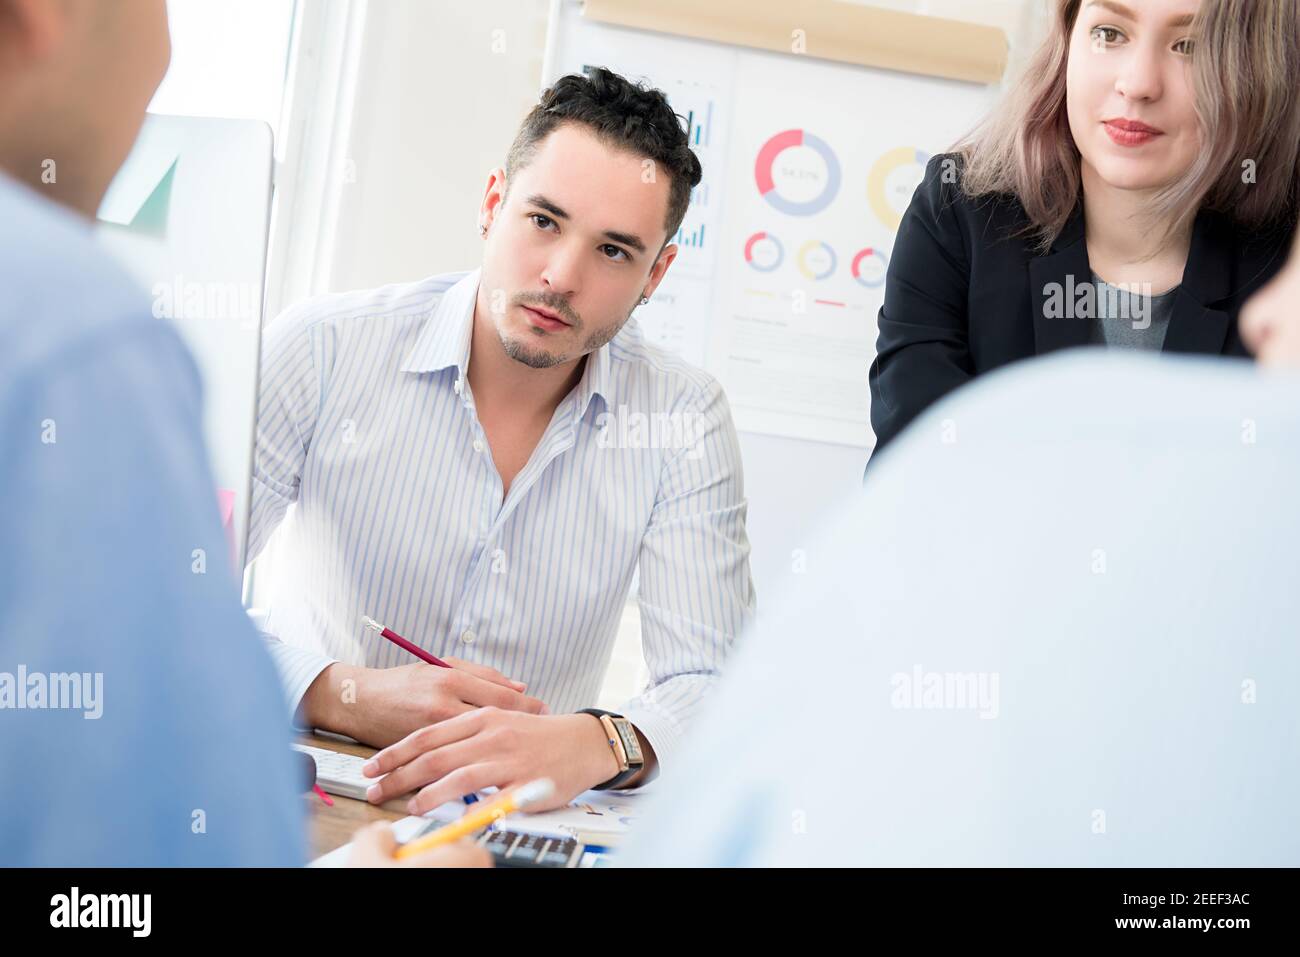 Business people paying attention to their colleague in the meeting Stock Photo